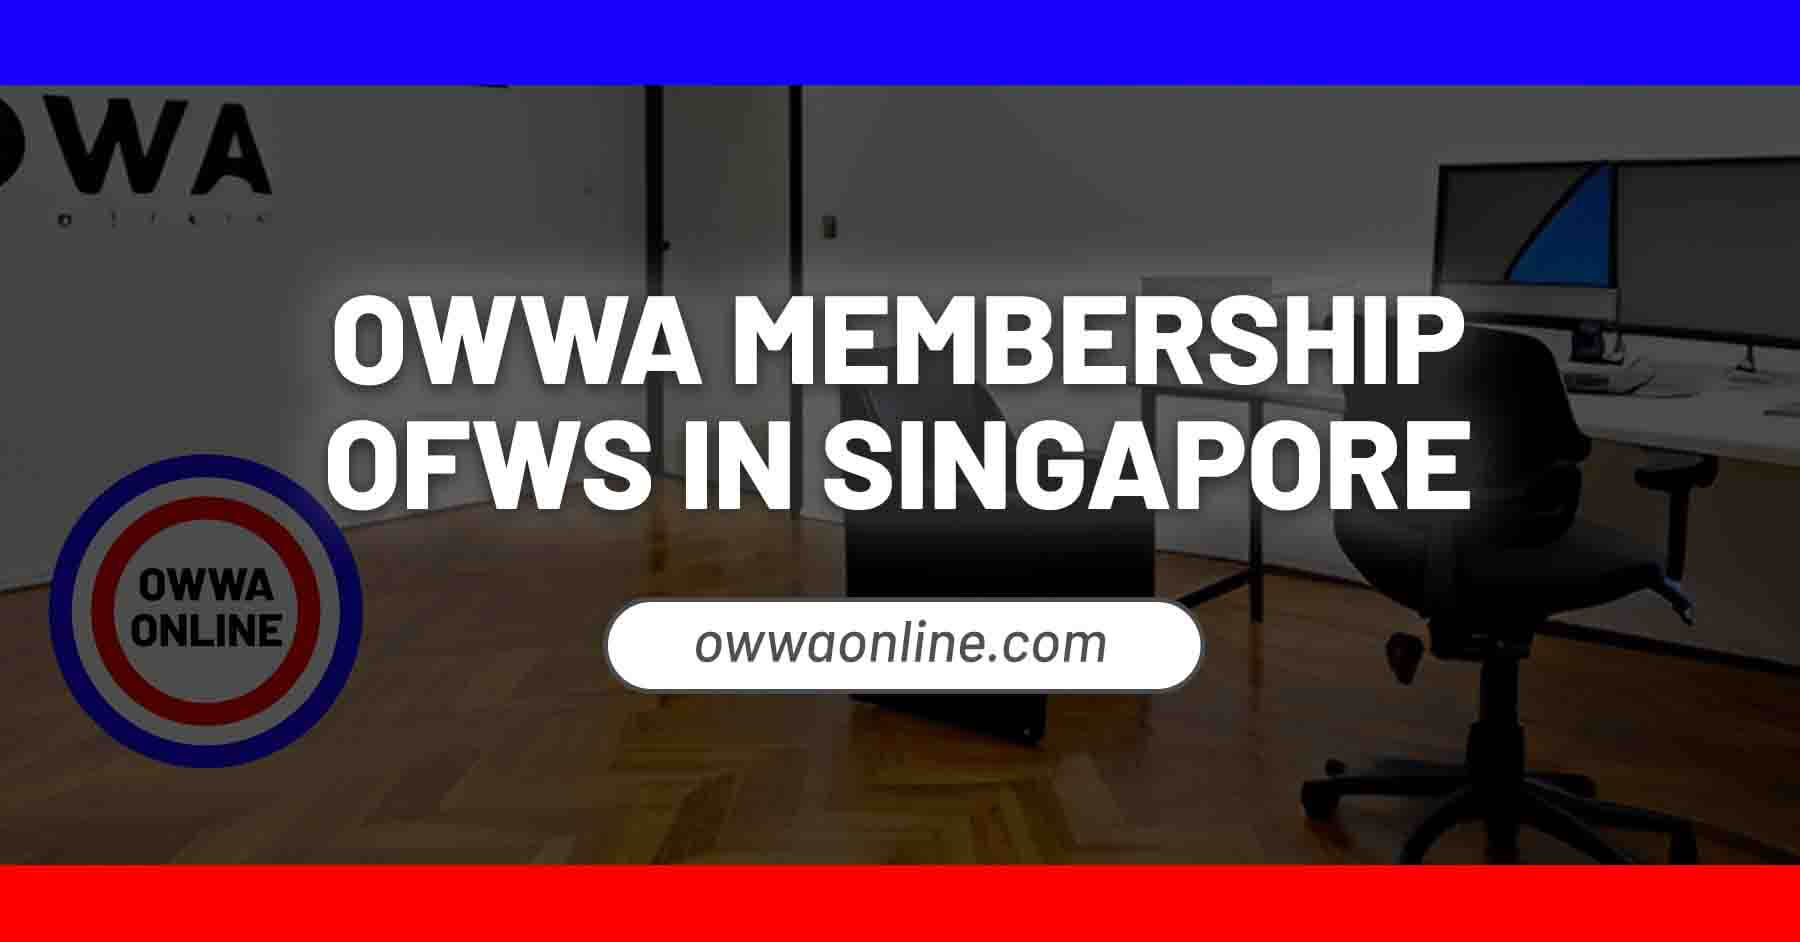 owwa membership application appointment in singapore